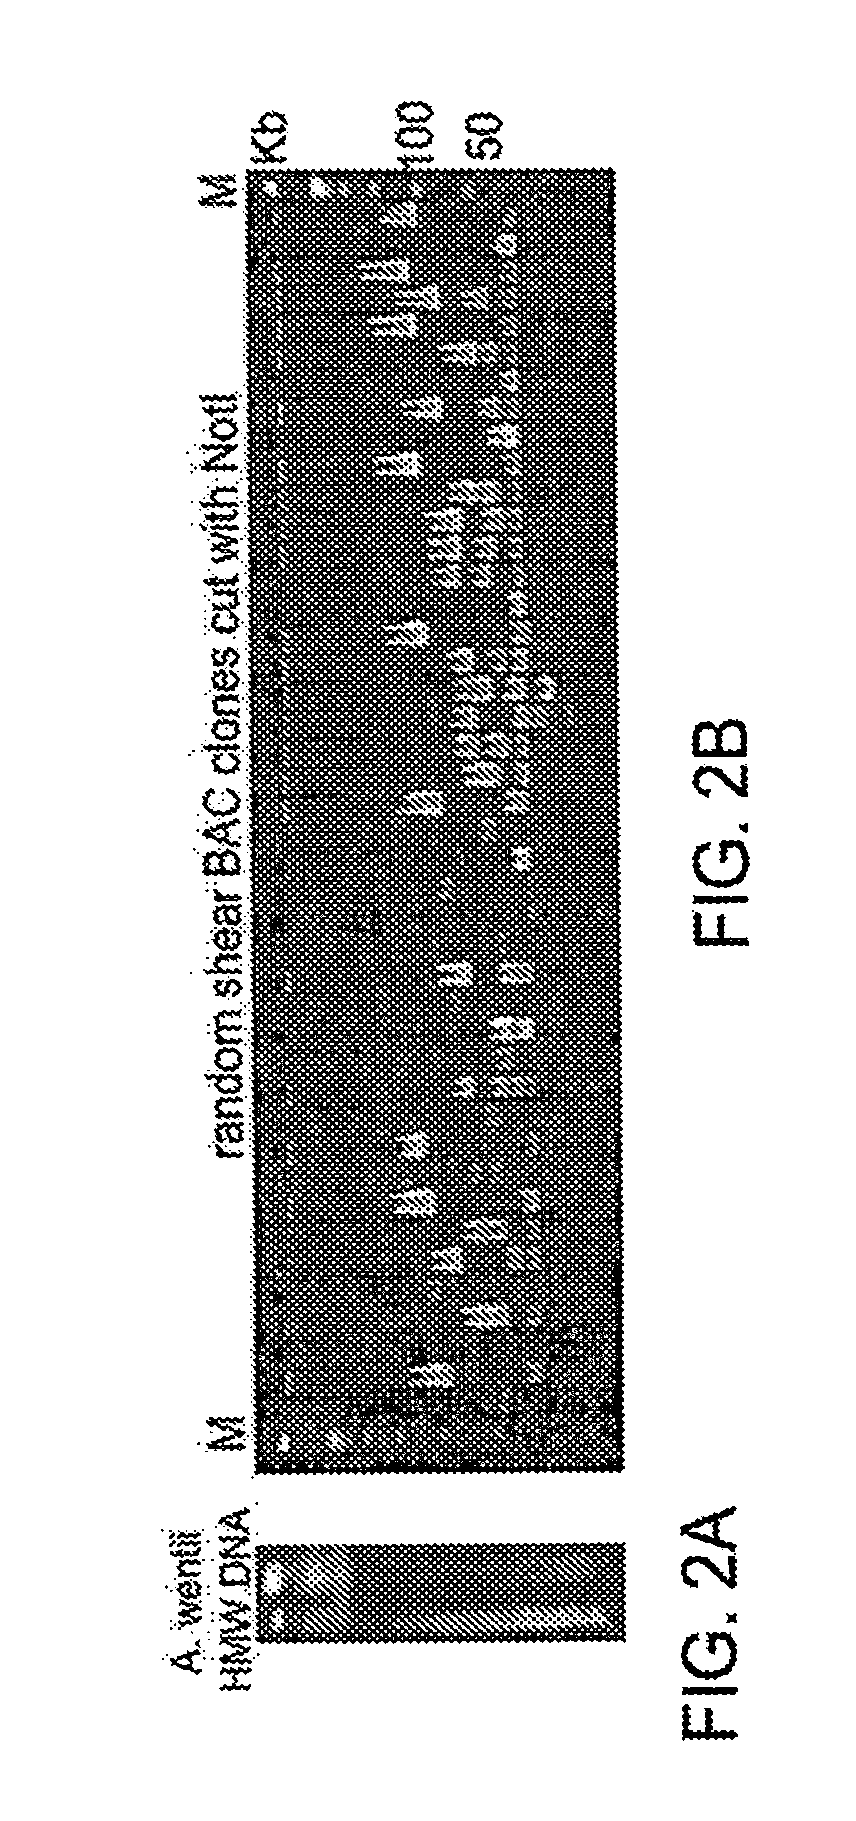 Fungal artificial chromosomes, compositions, methods and uses therfor